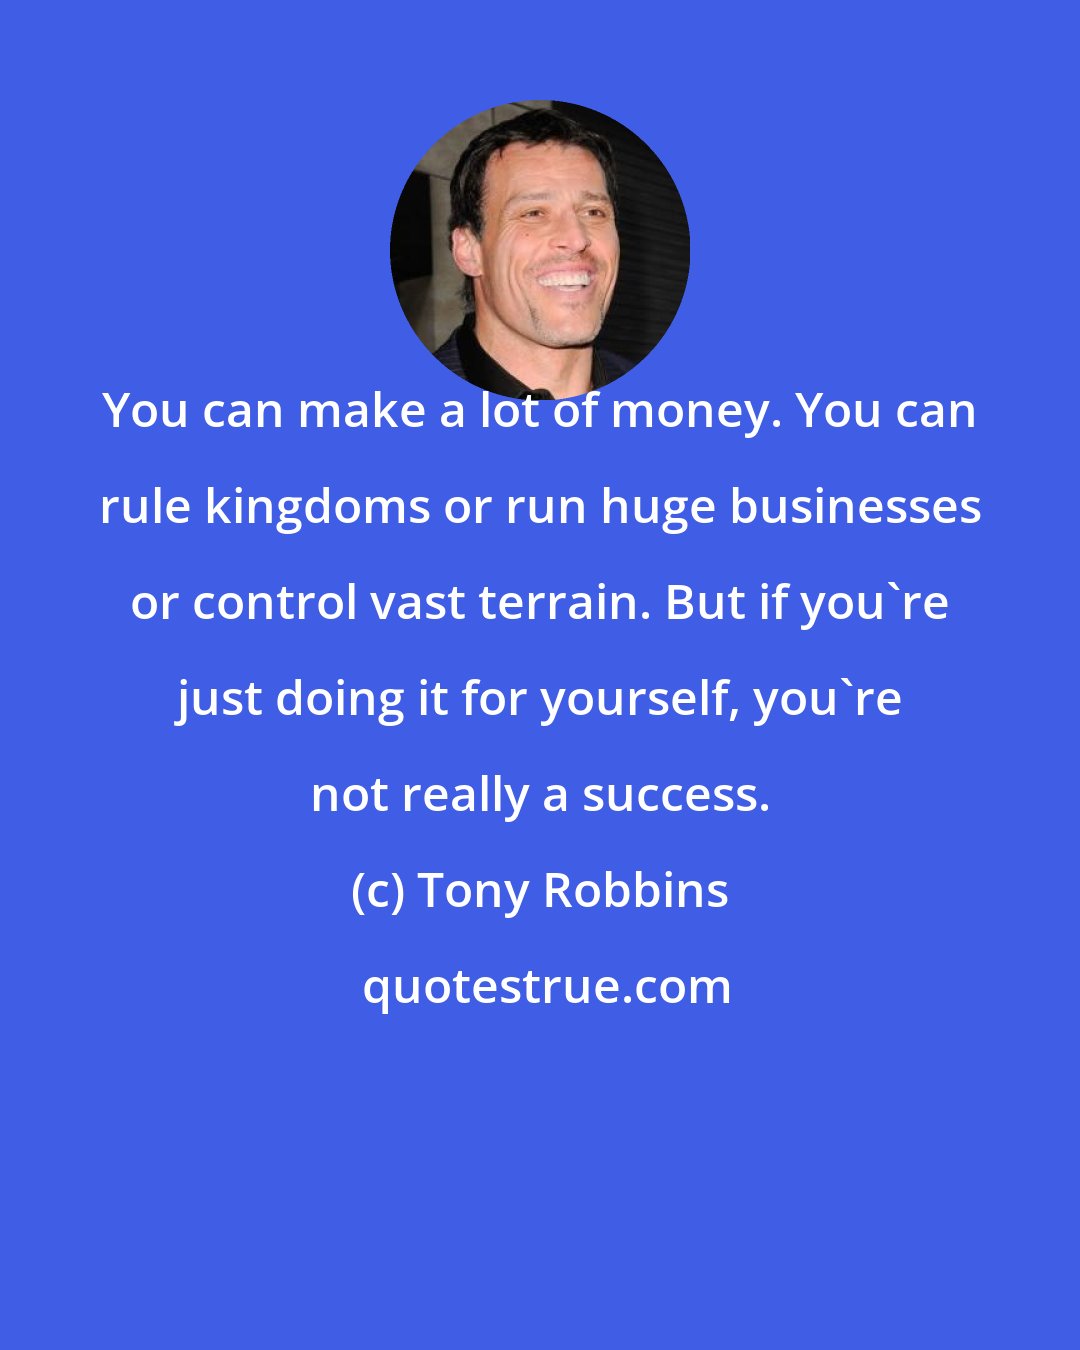 Tony Robbins: You can make a lot of money. You can rule kingdoms or run huge businesses or control vast terrain. But if you're just doing it for yourself, you're not really a success.